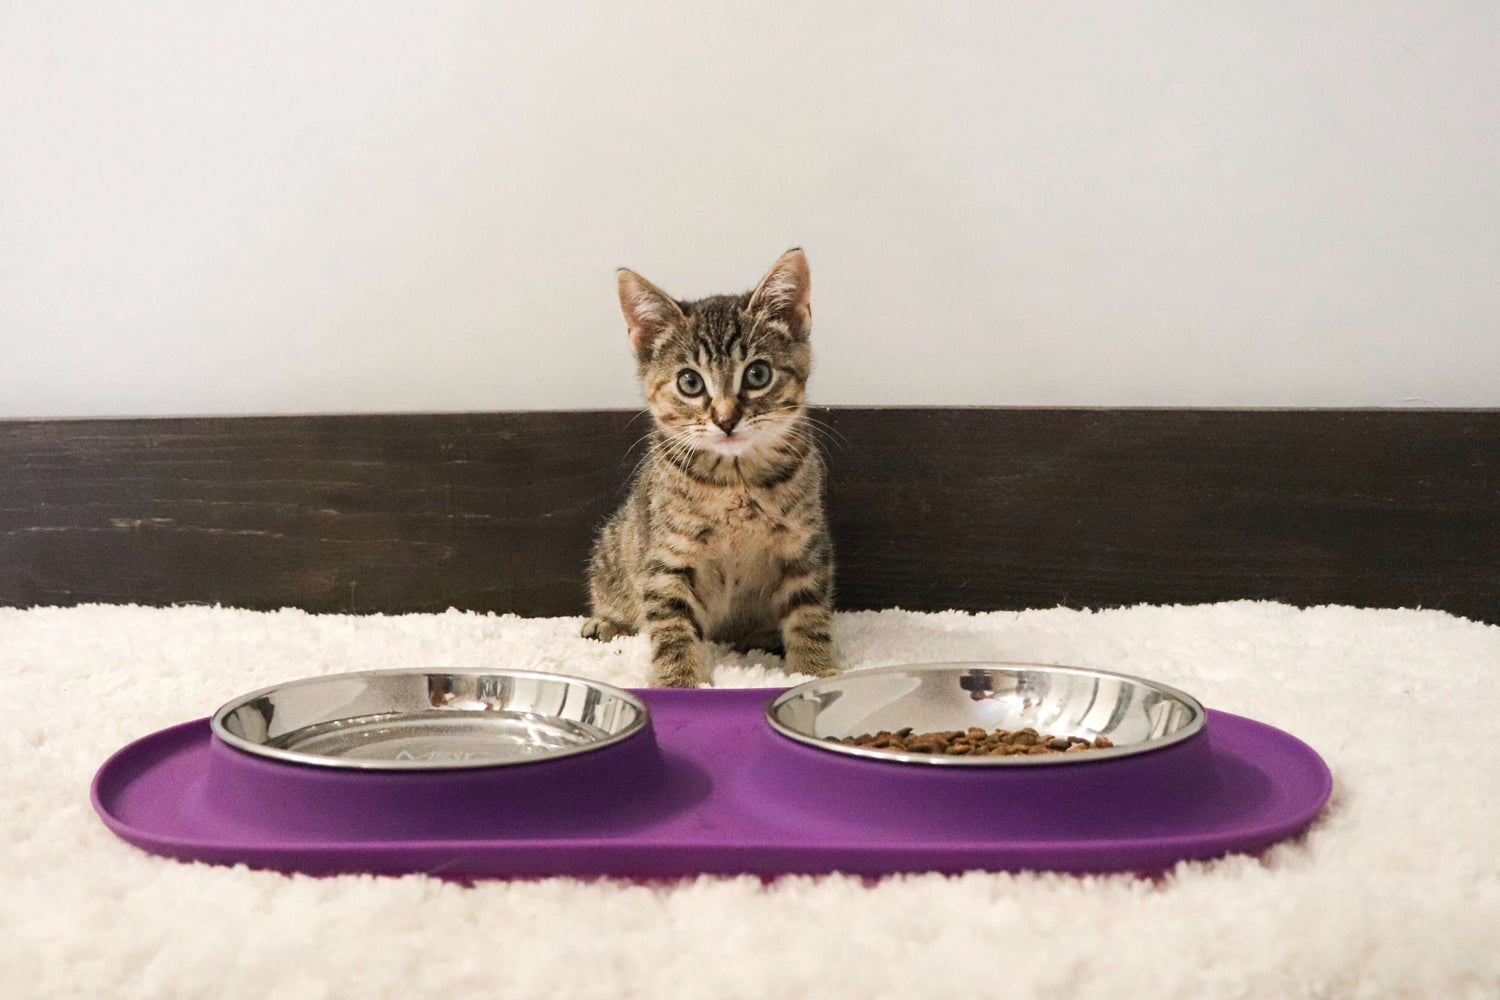 Cute kitten with purple feeder reducing whisker fatigue with stainless steel bowls